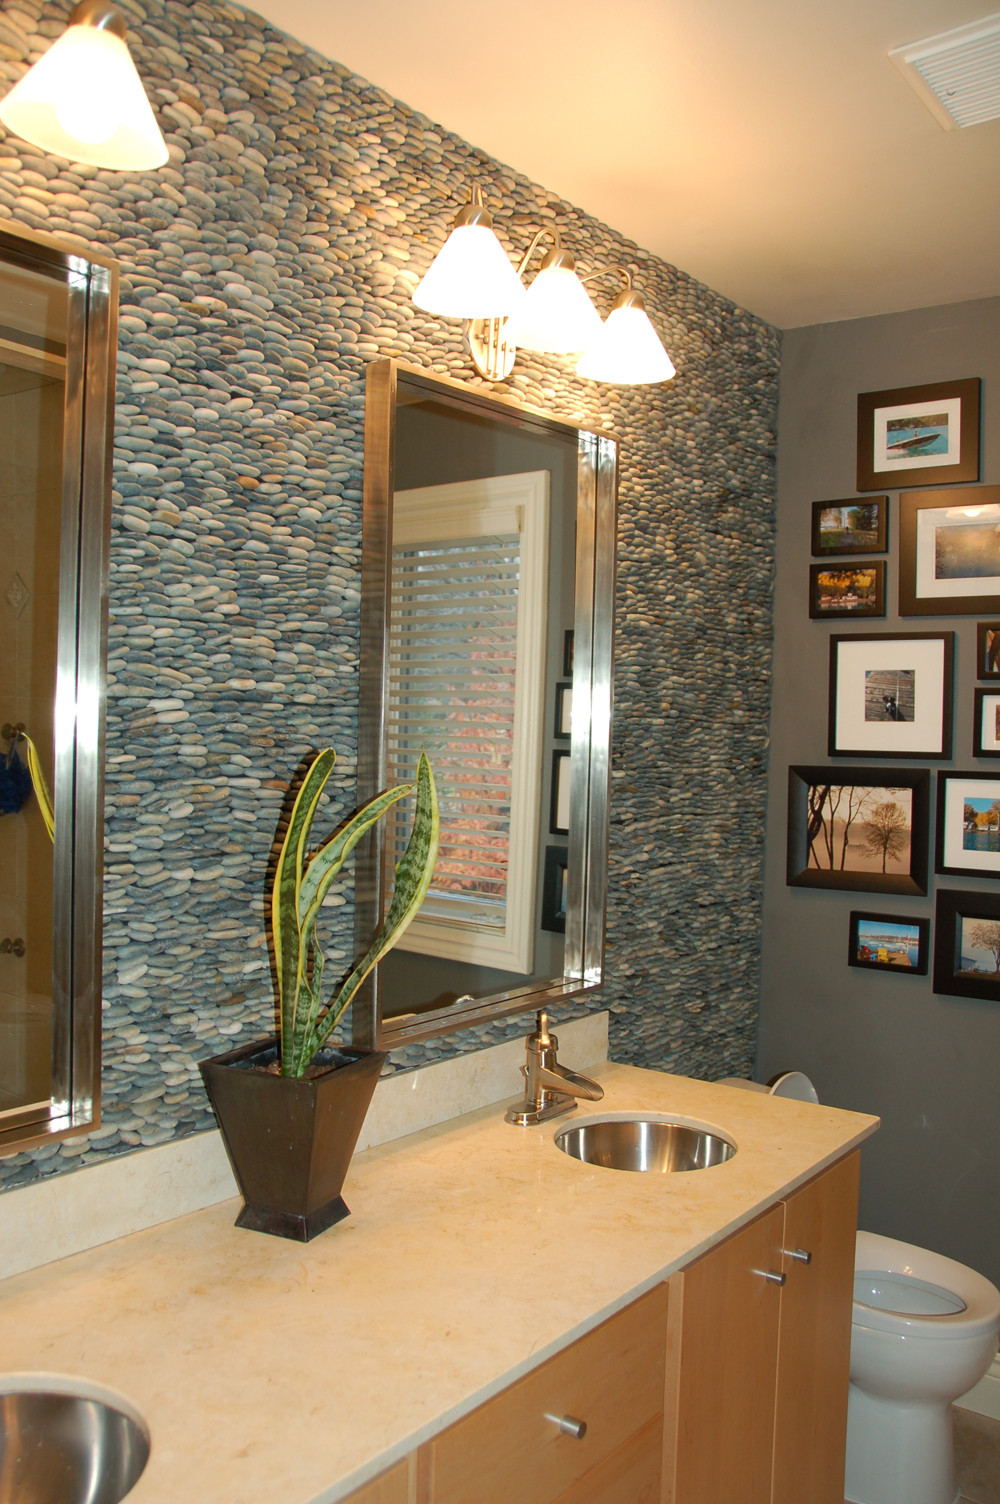 Rock Tile Bathroom
 29 great ideas and pictures of river rock tiles for the